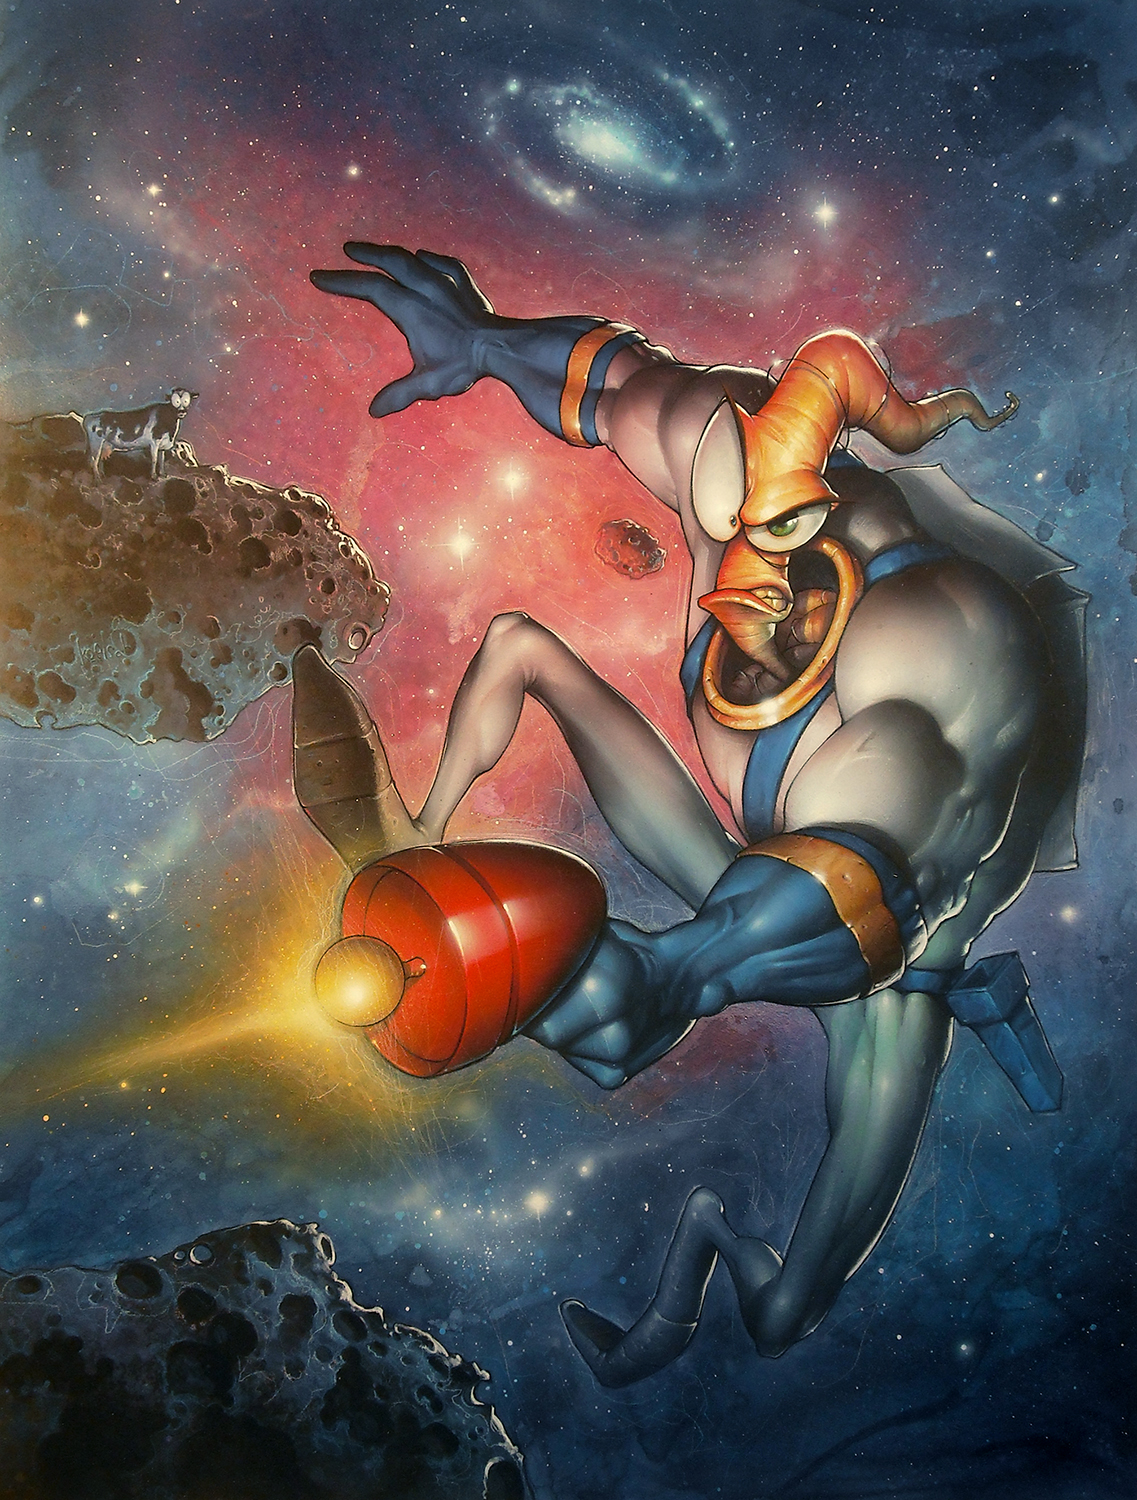 download earthworm jim 1 switch